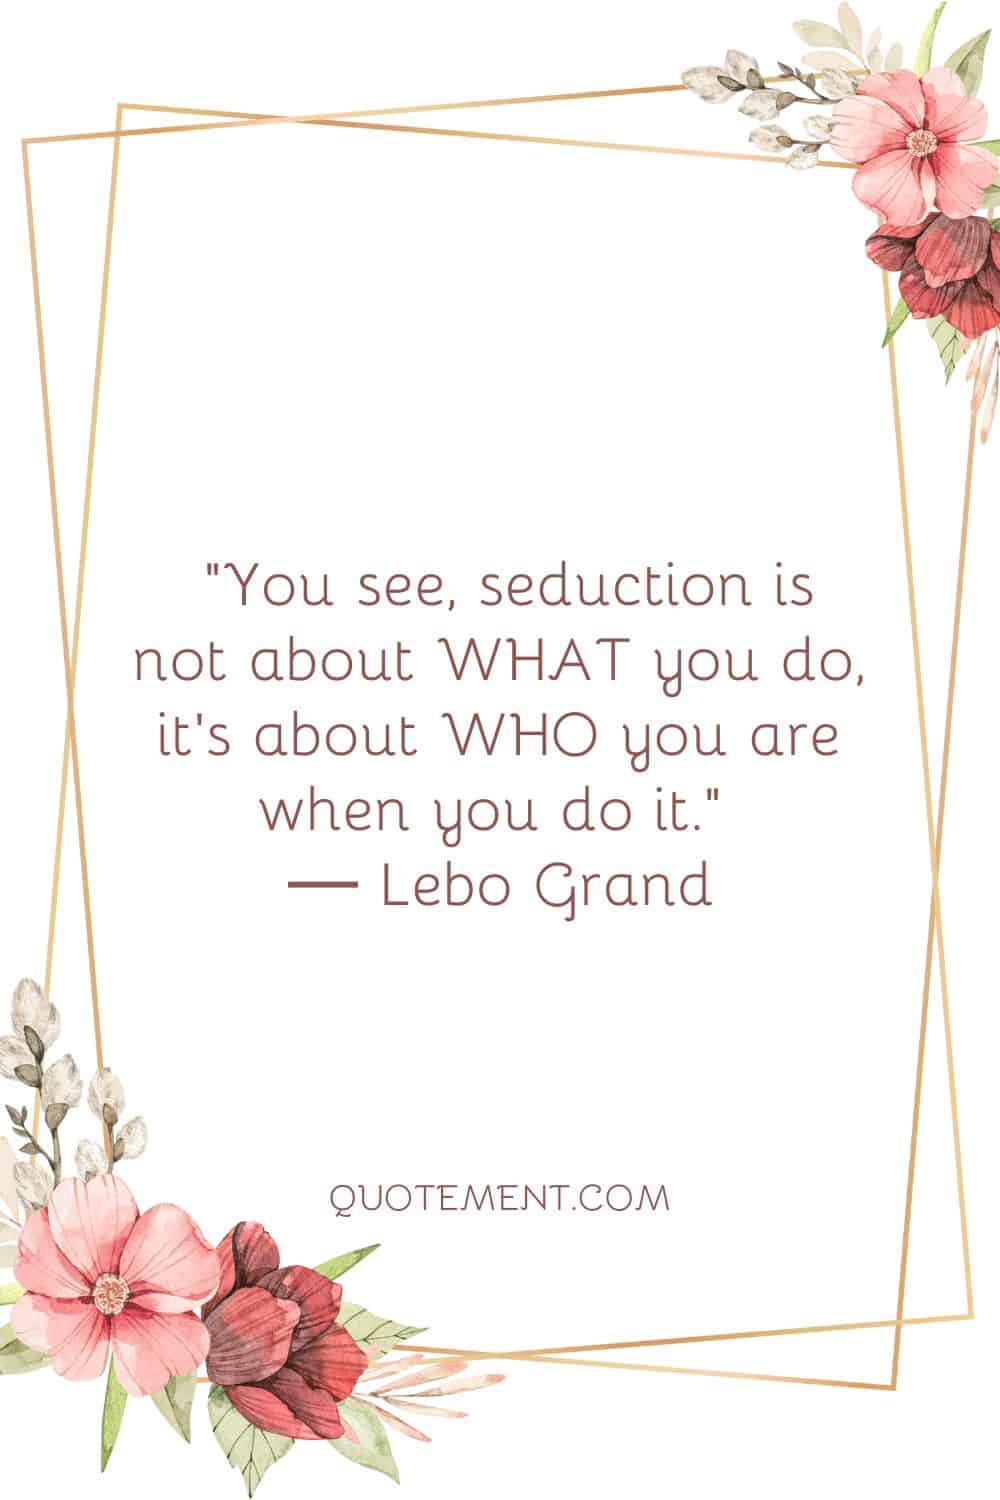 You see, seduction is not about WHAT you do, it’s about WHO you are when you do it